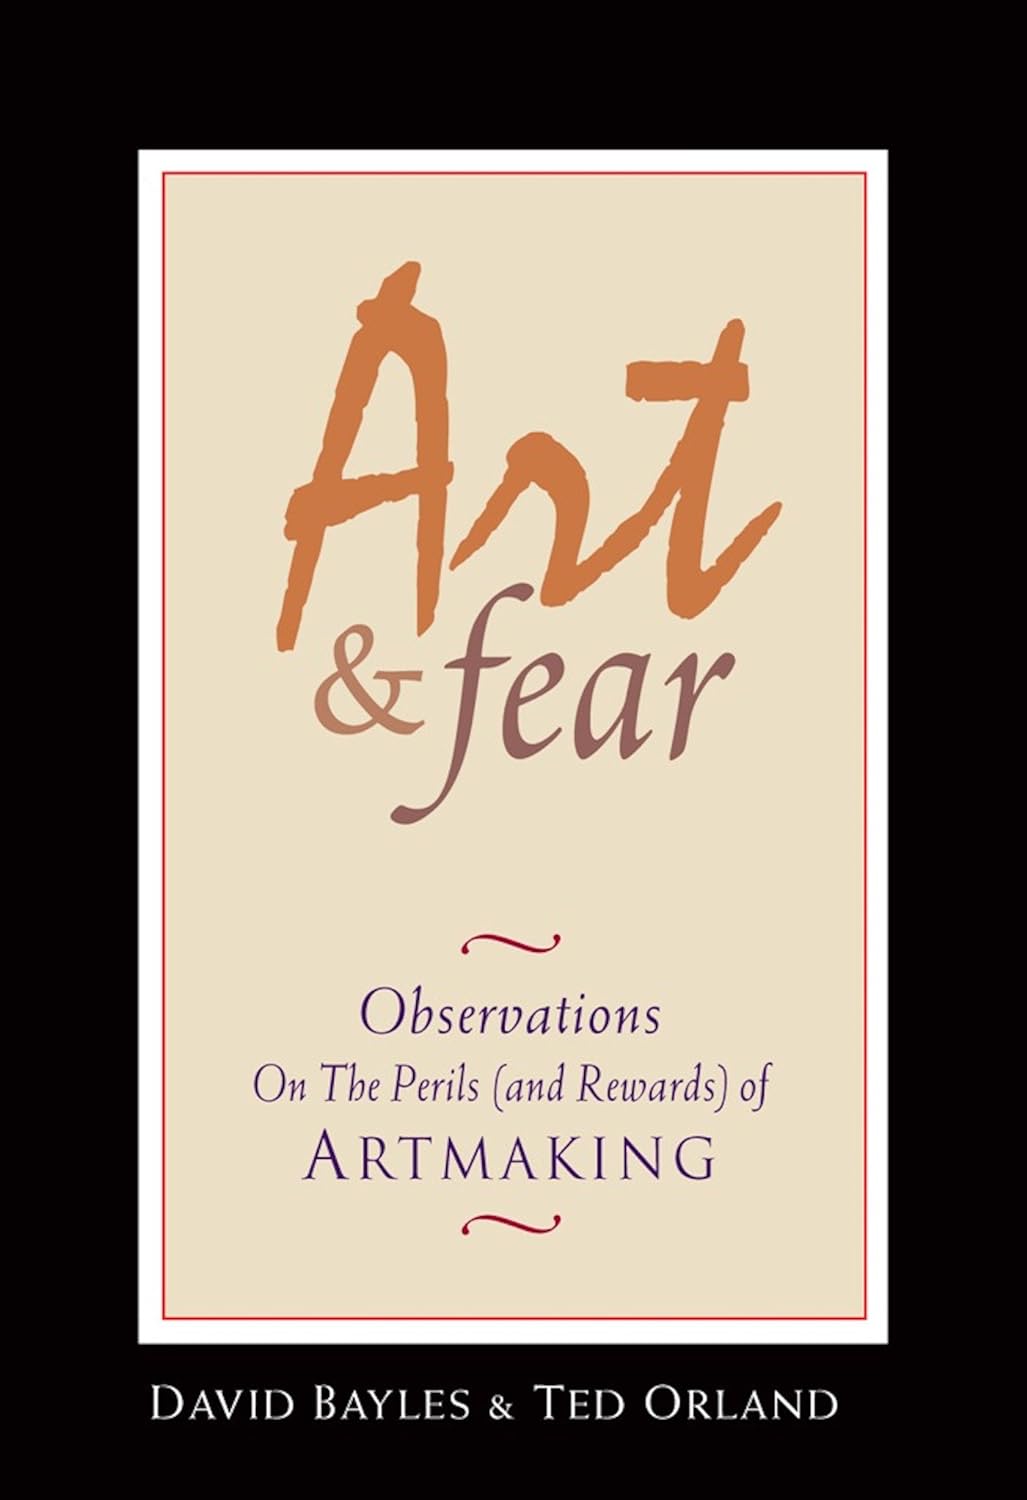 David Bayles, Ted Orland: Art & fear (1993, Image Continuum Press, Distributed by Consortium Book Sales & Distribution)